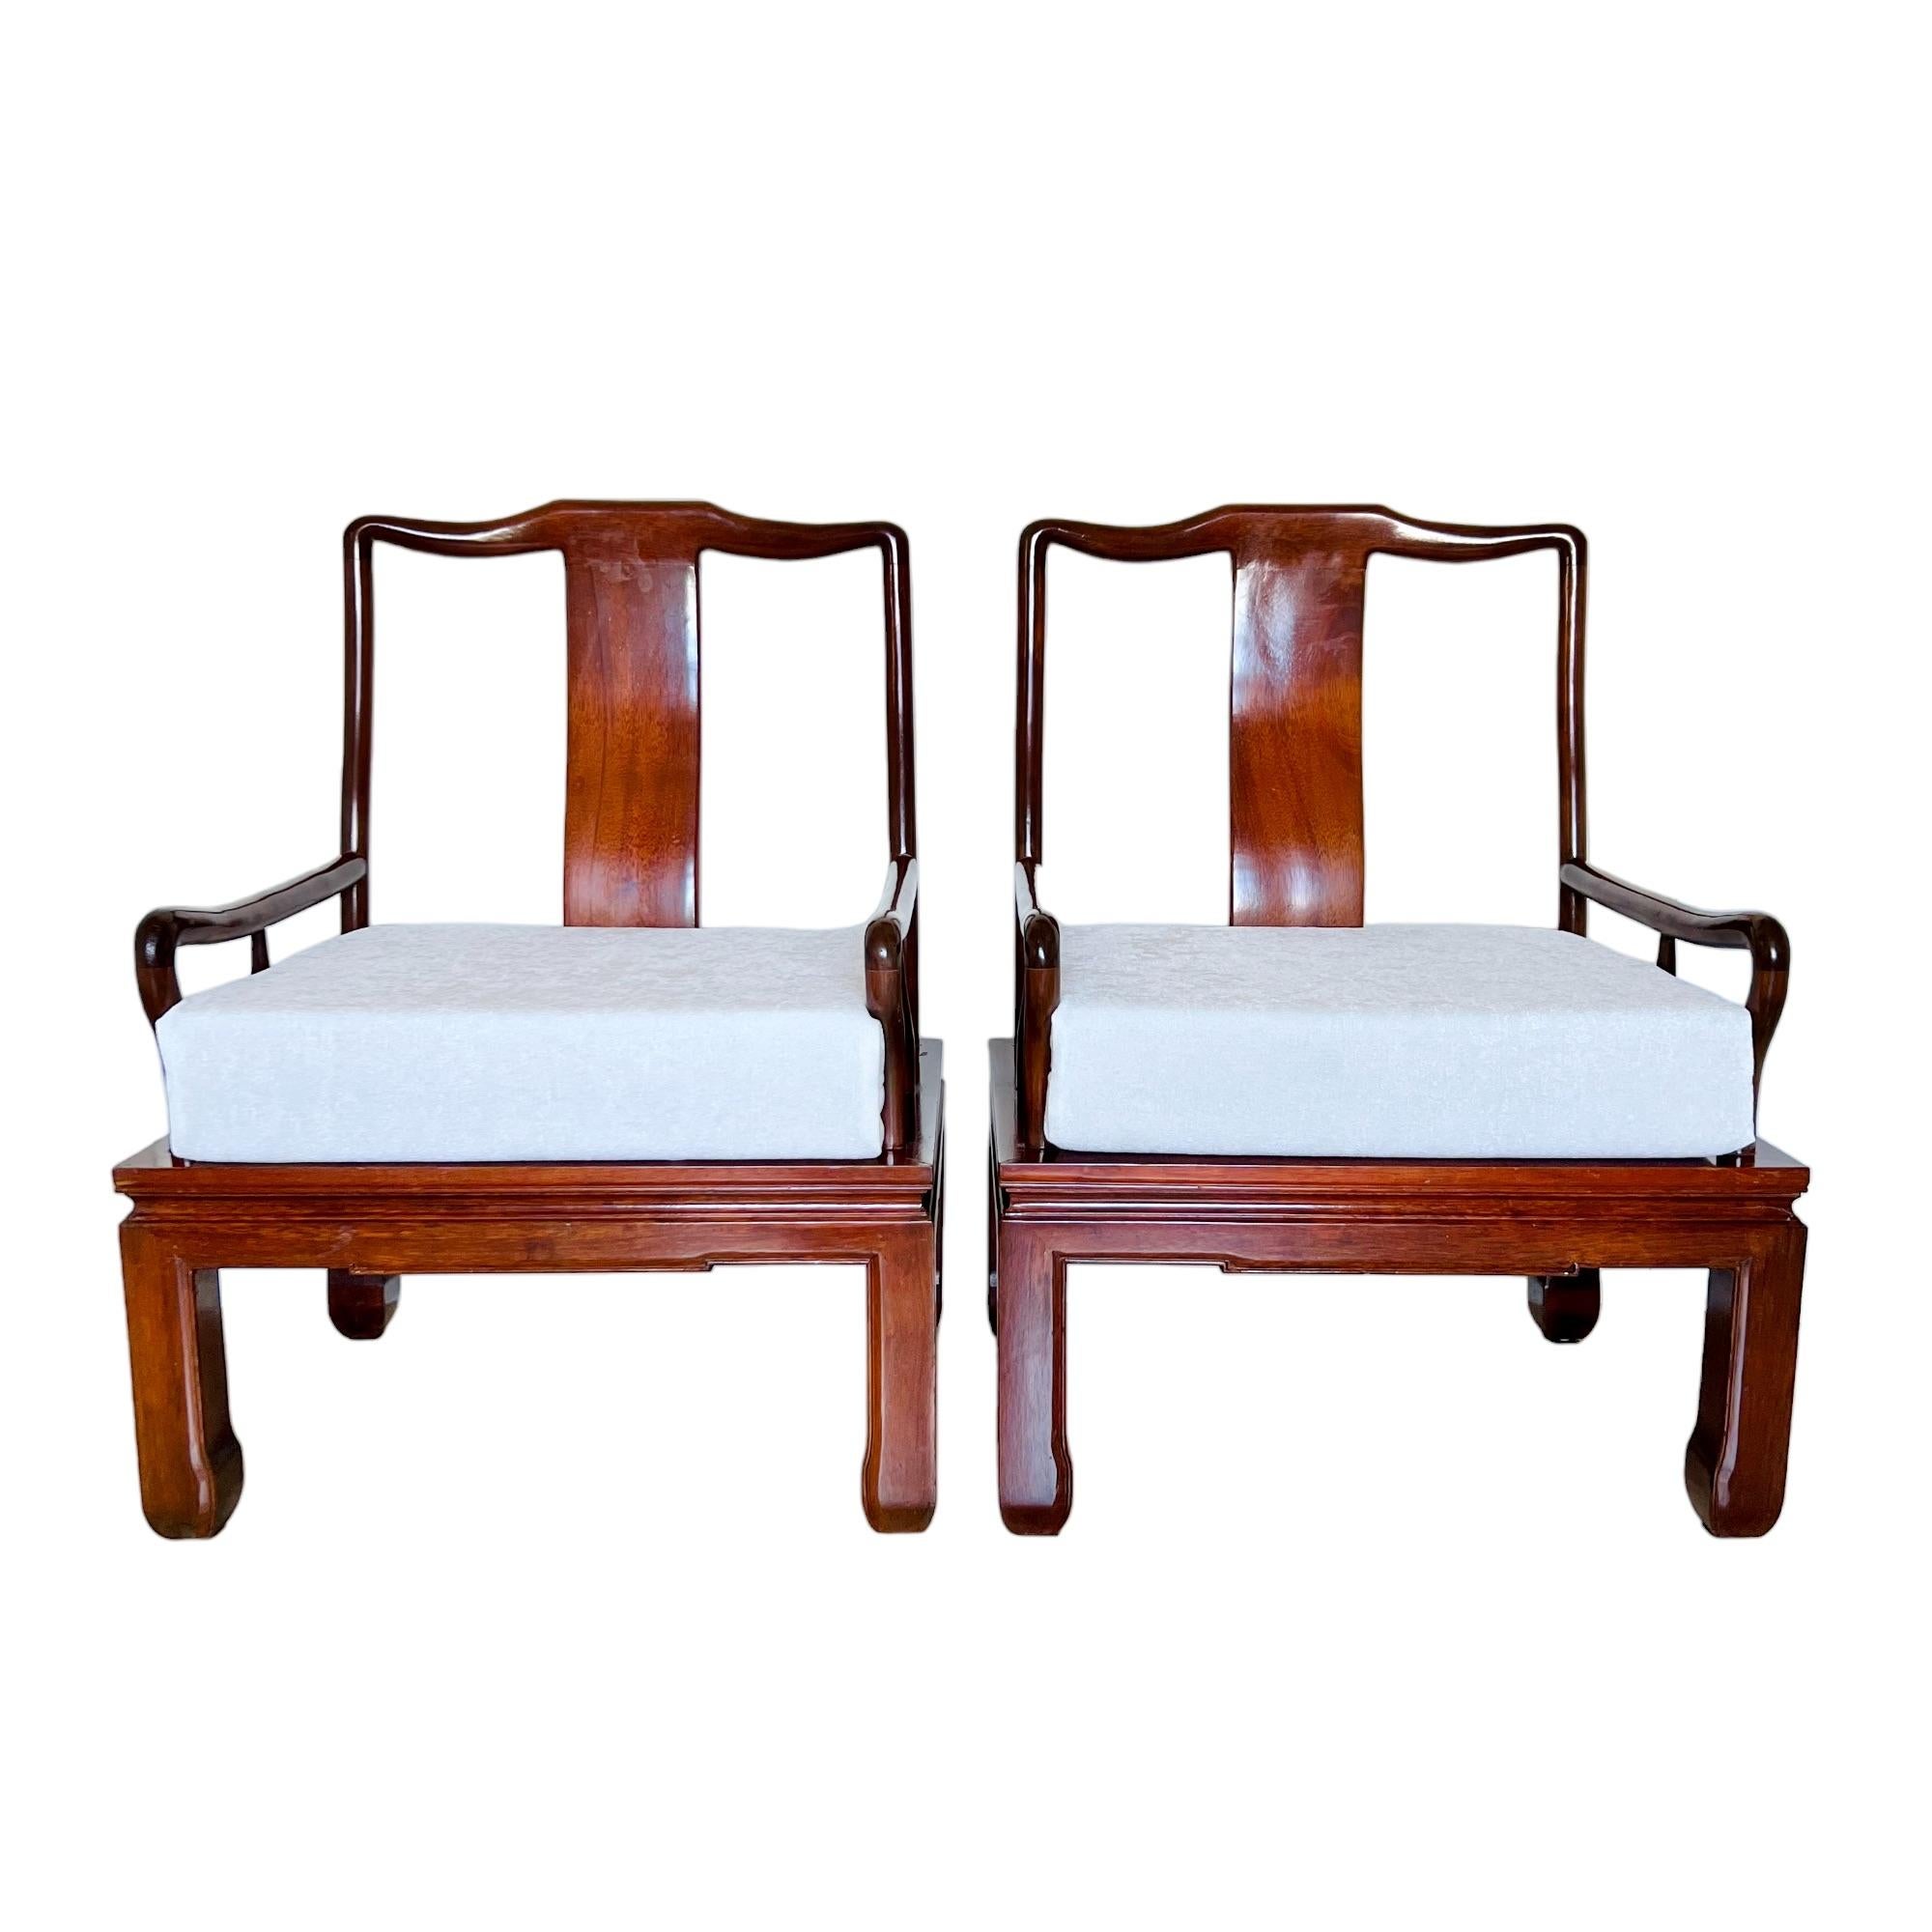 A vintage pair of Chinese Ming style lacquered wood arm chairs with seat cushions. The chinoiserie design features a splat back, low arms with tapered curved middle supports and squared legs with chow feet. The seat cushions are covered in white